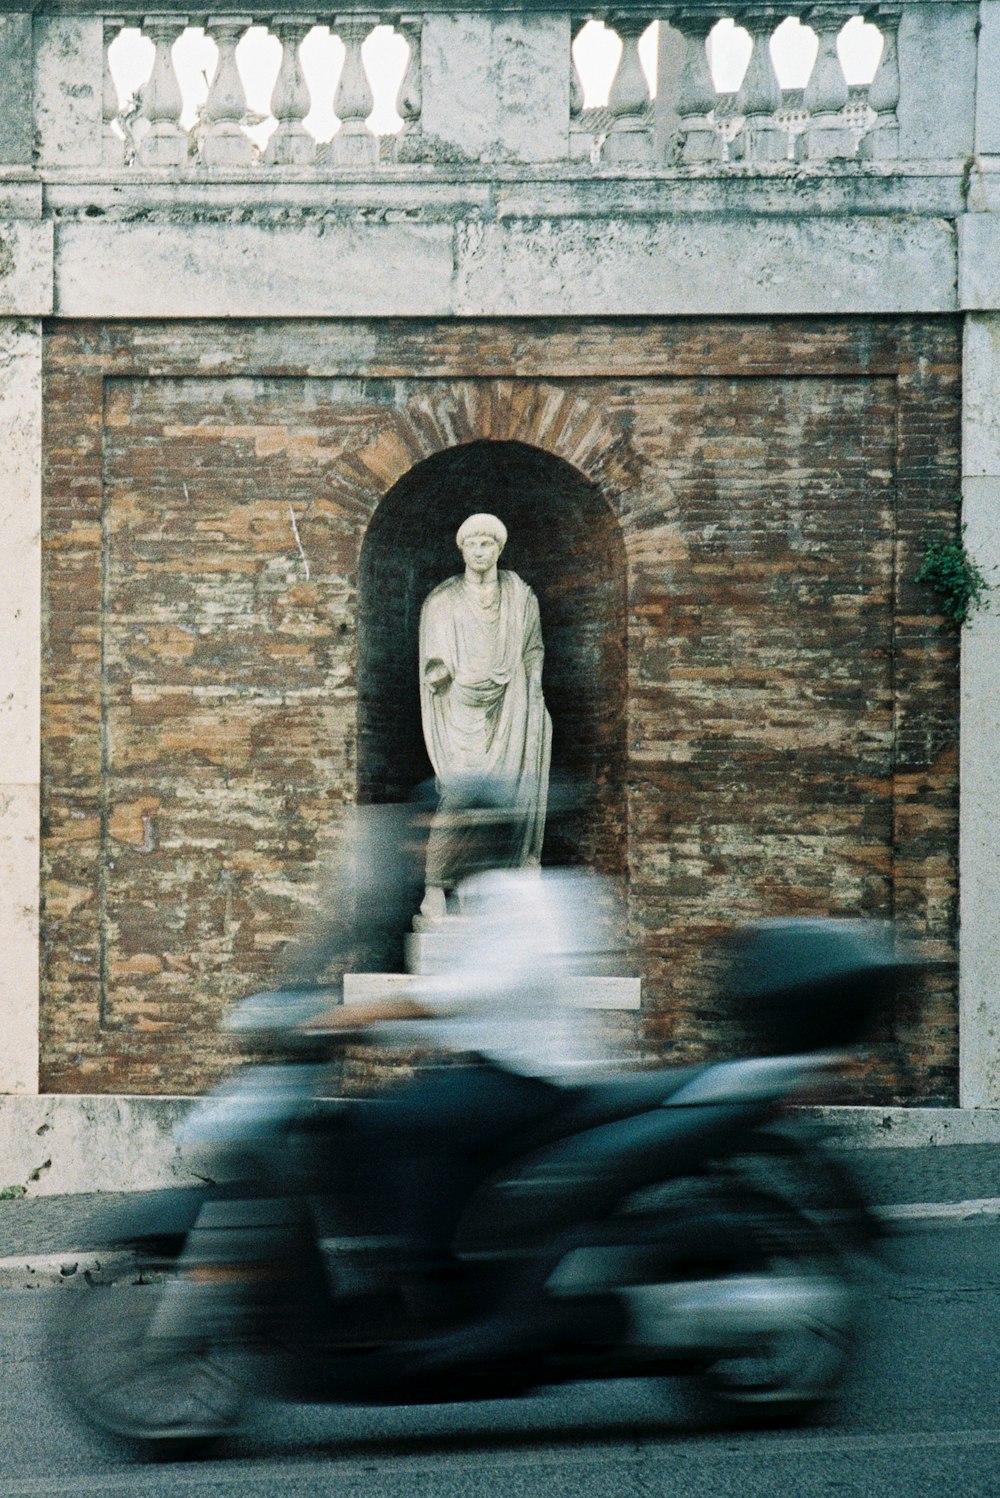 a blurry photo of a motorcycle passing by a statue